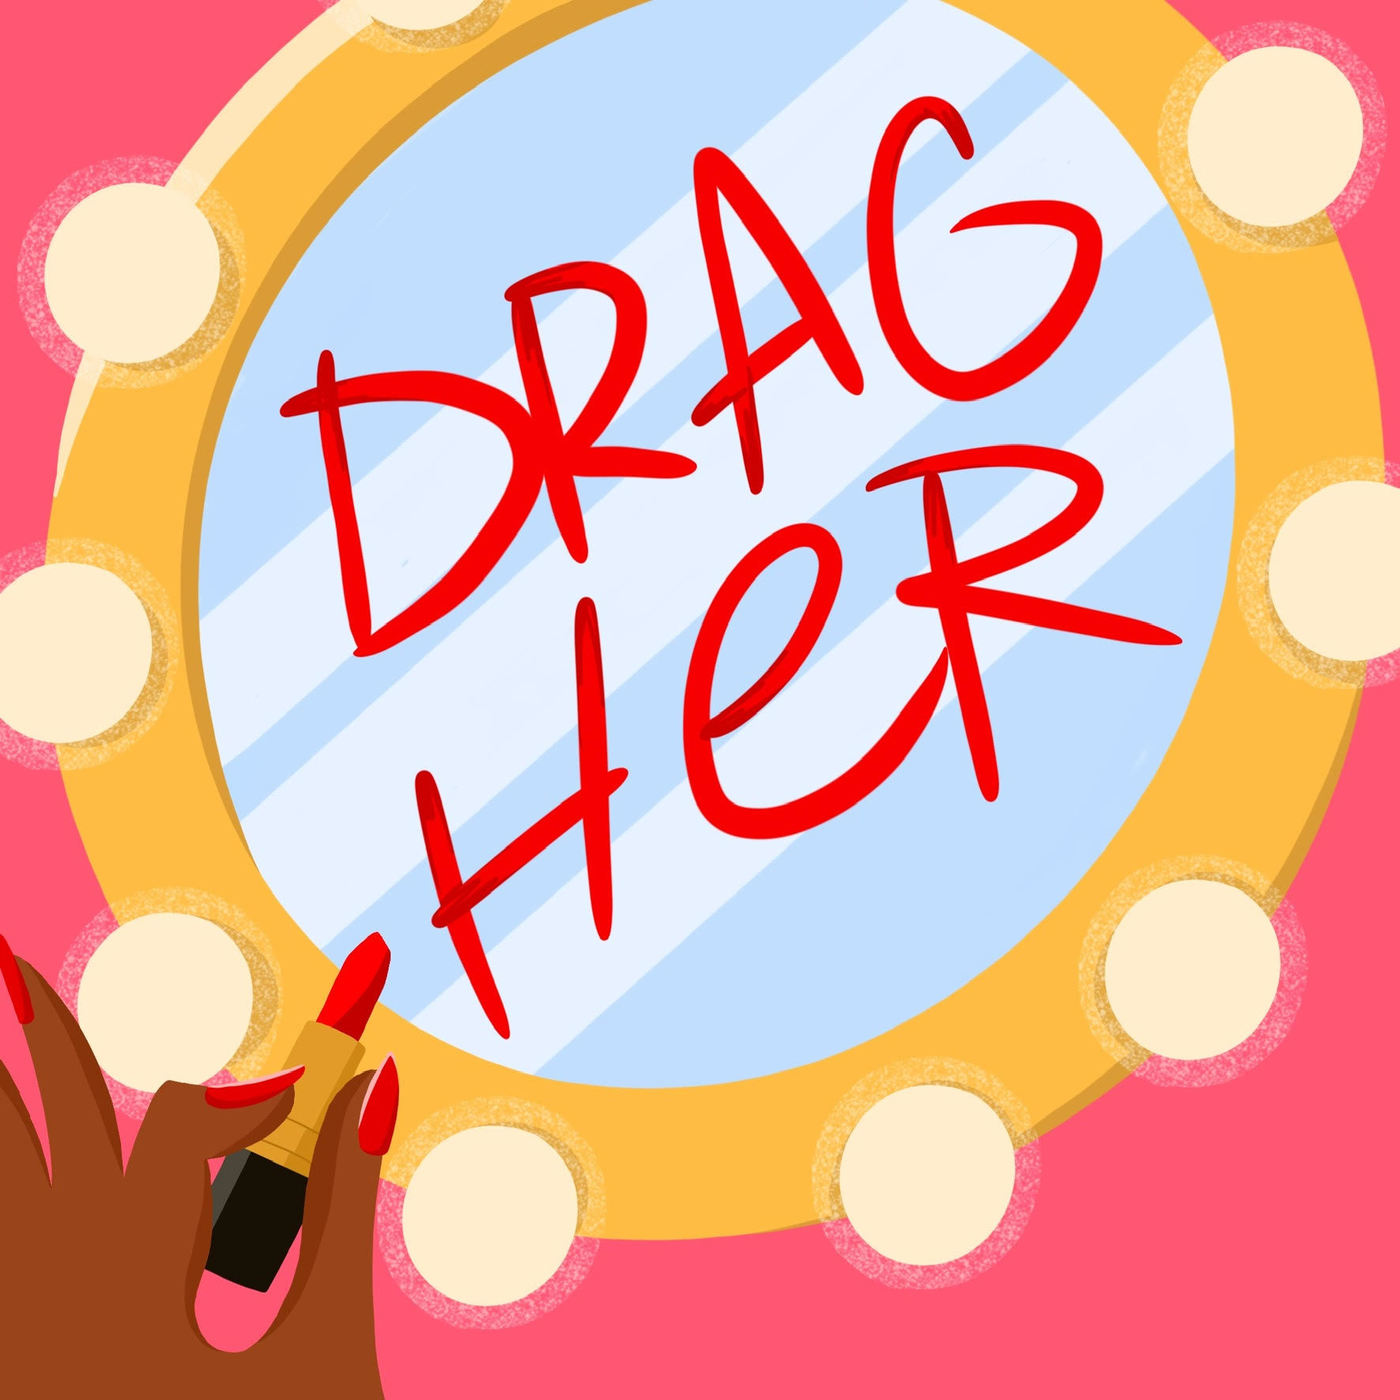 Drag Her! A RuPaul's Drag Race Podcast on Apple Podcasts